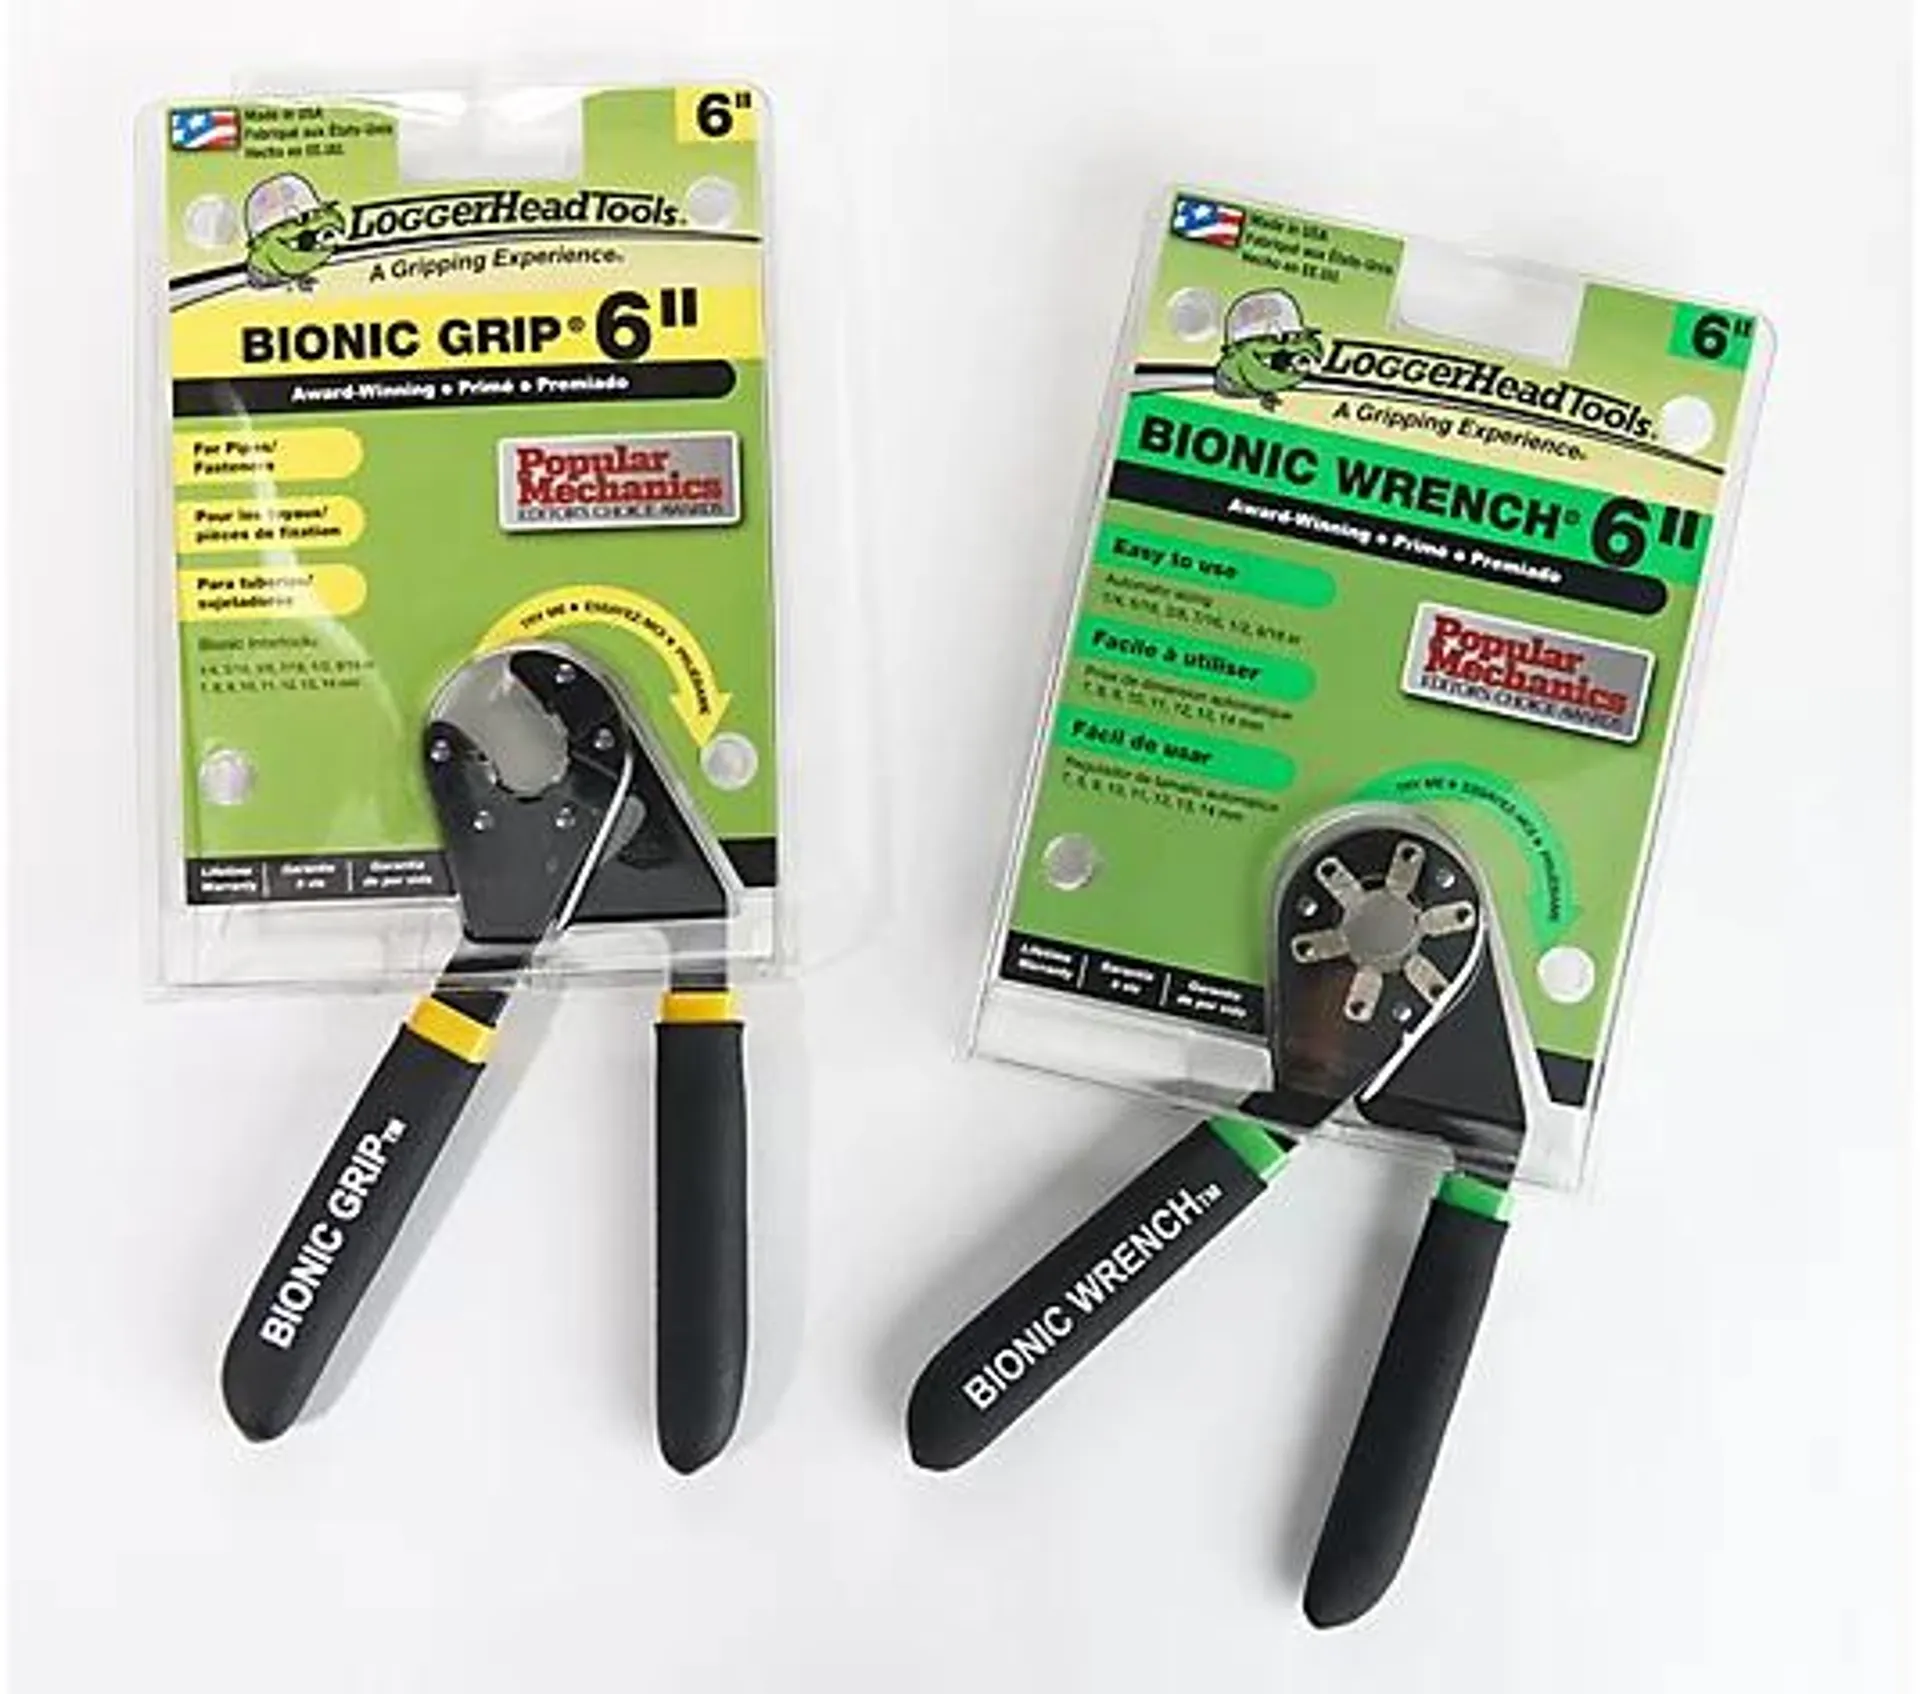 Bionic Wrench 2 Piece Self Adjusting 6" Wrench and 6" Grip Tools